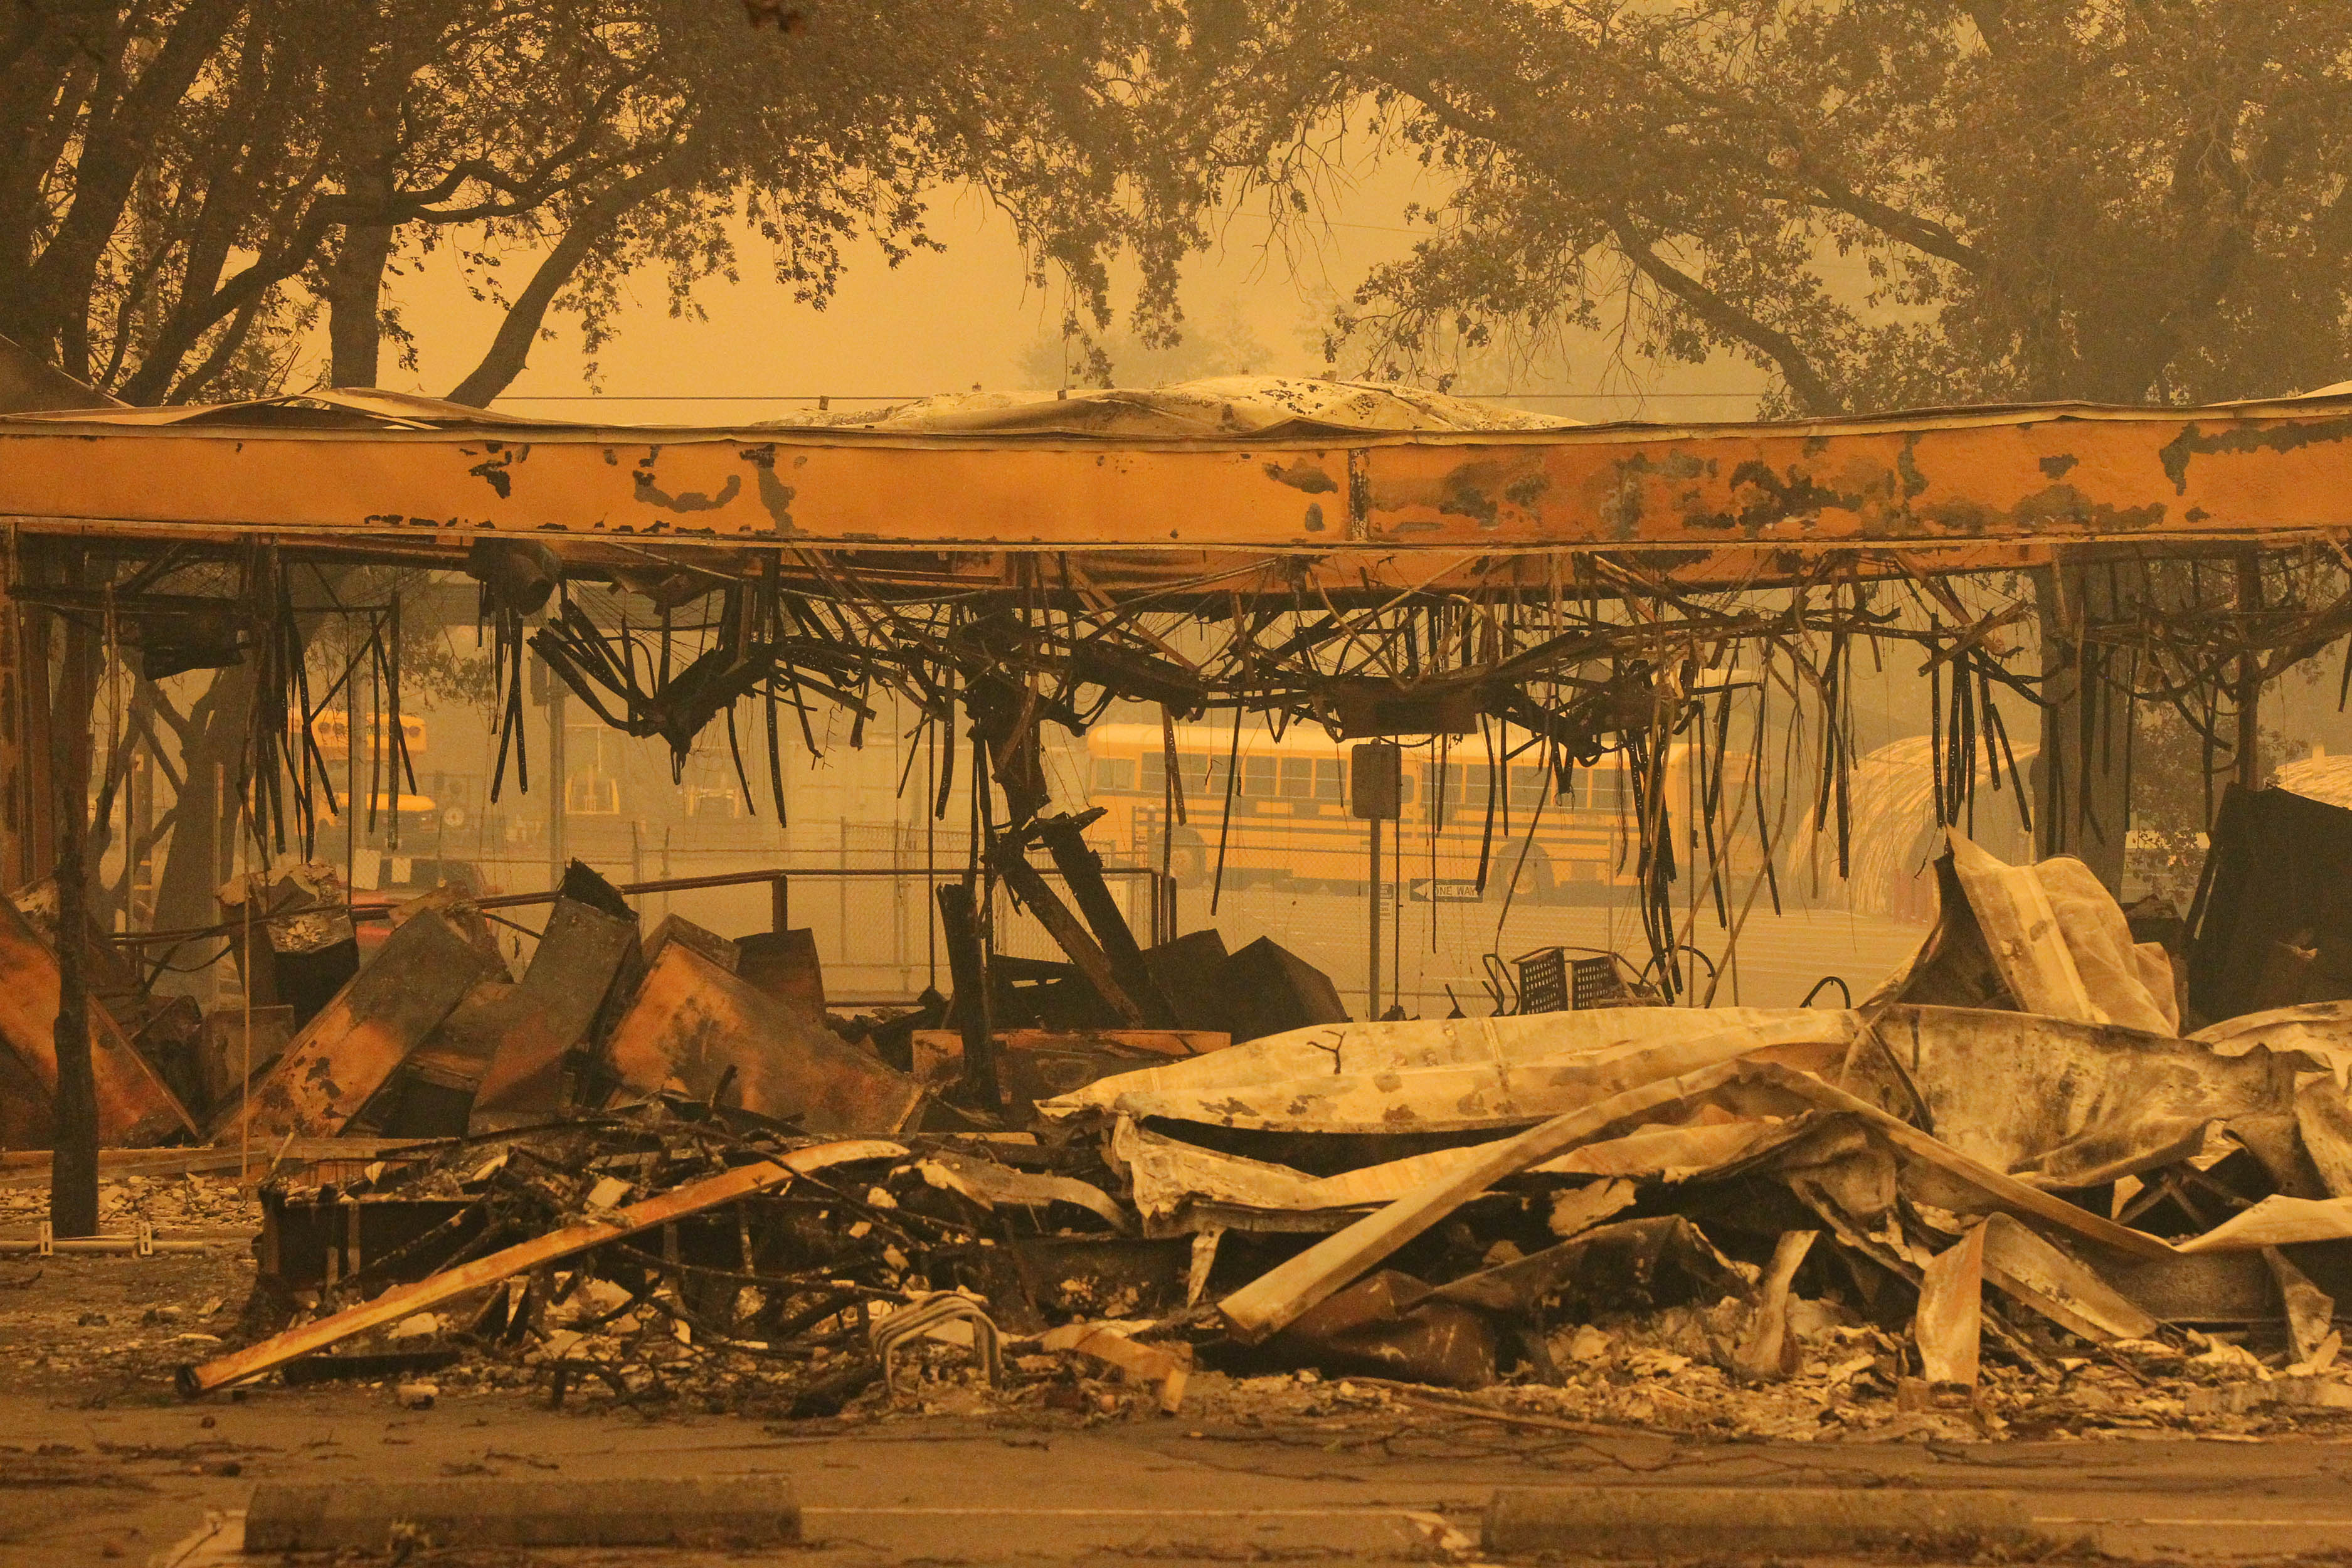 Historic mining town Havilah wiped out by Borel Fire as wildfires ravage California